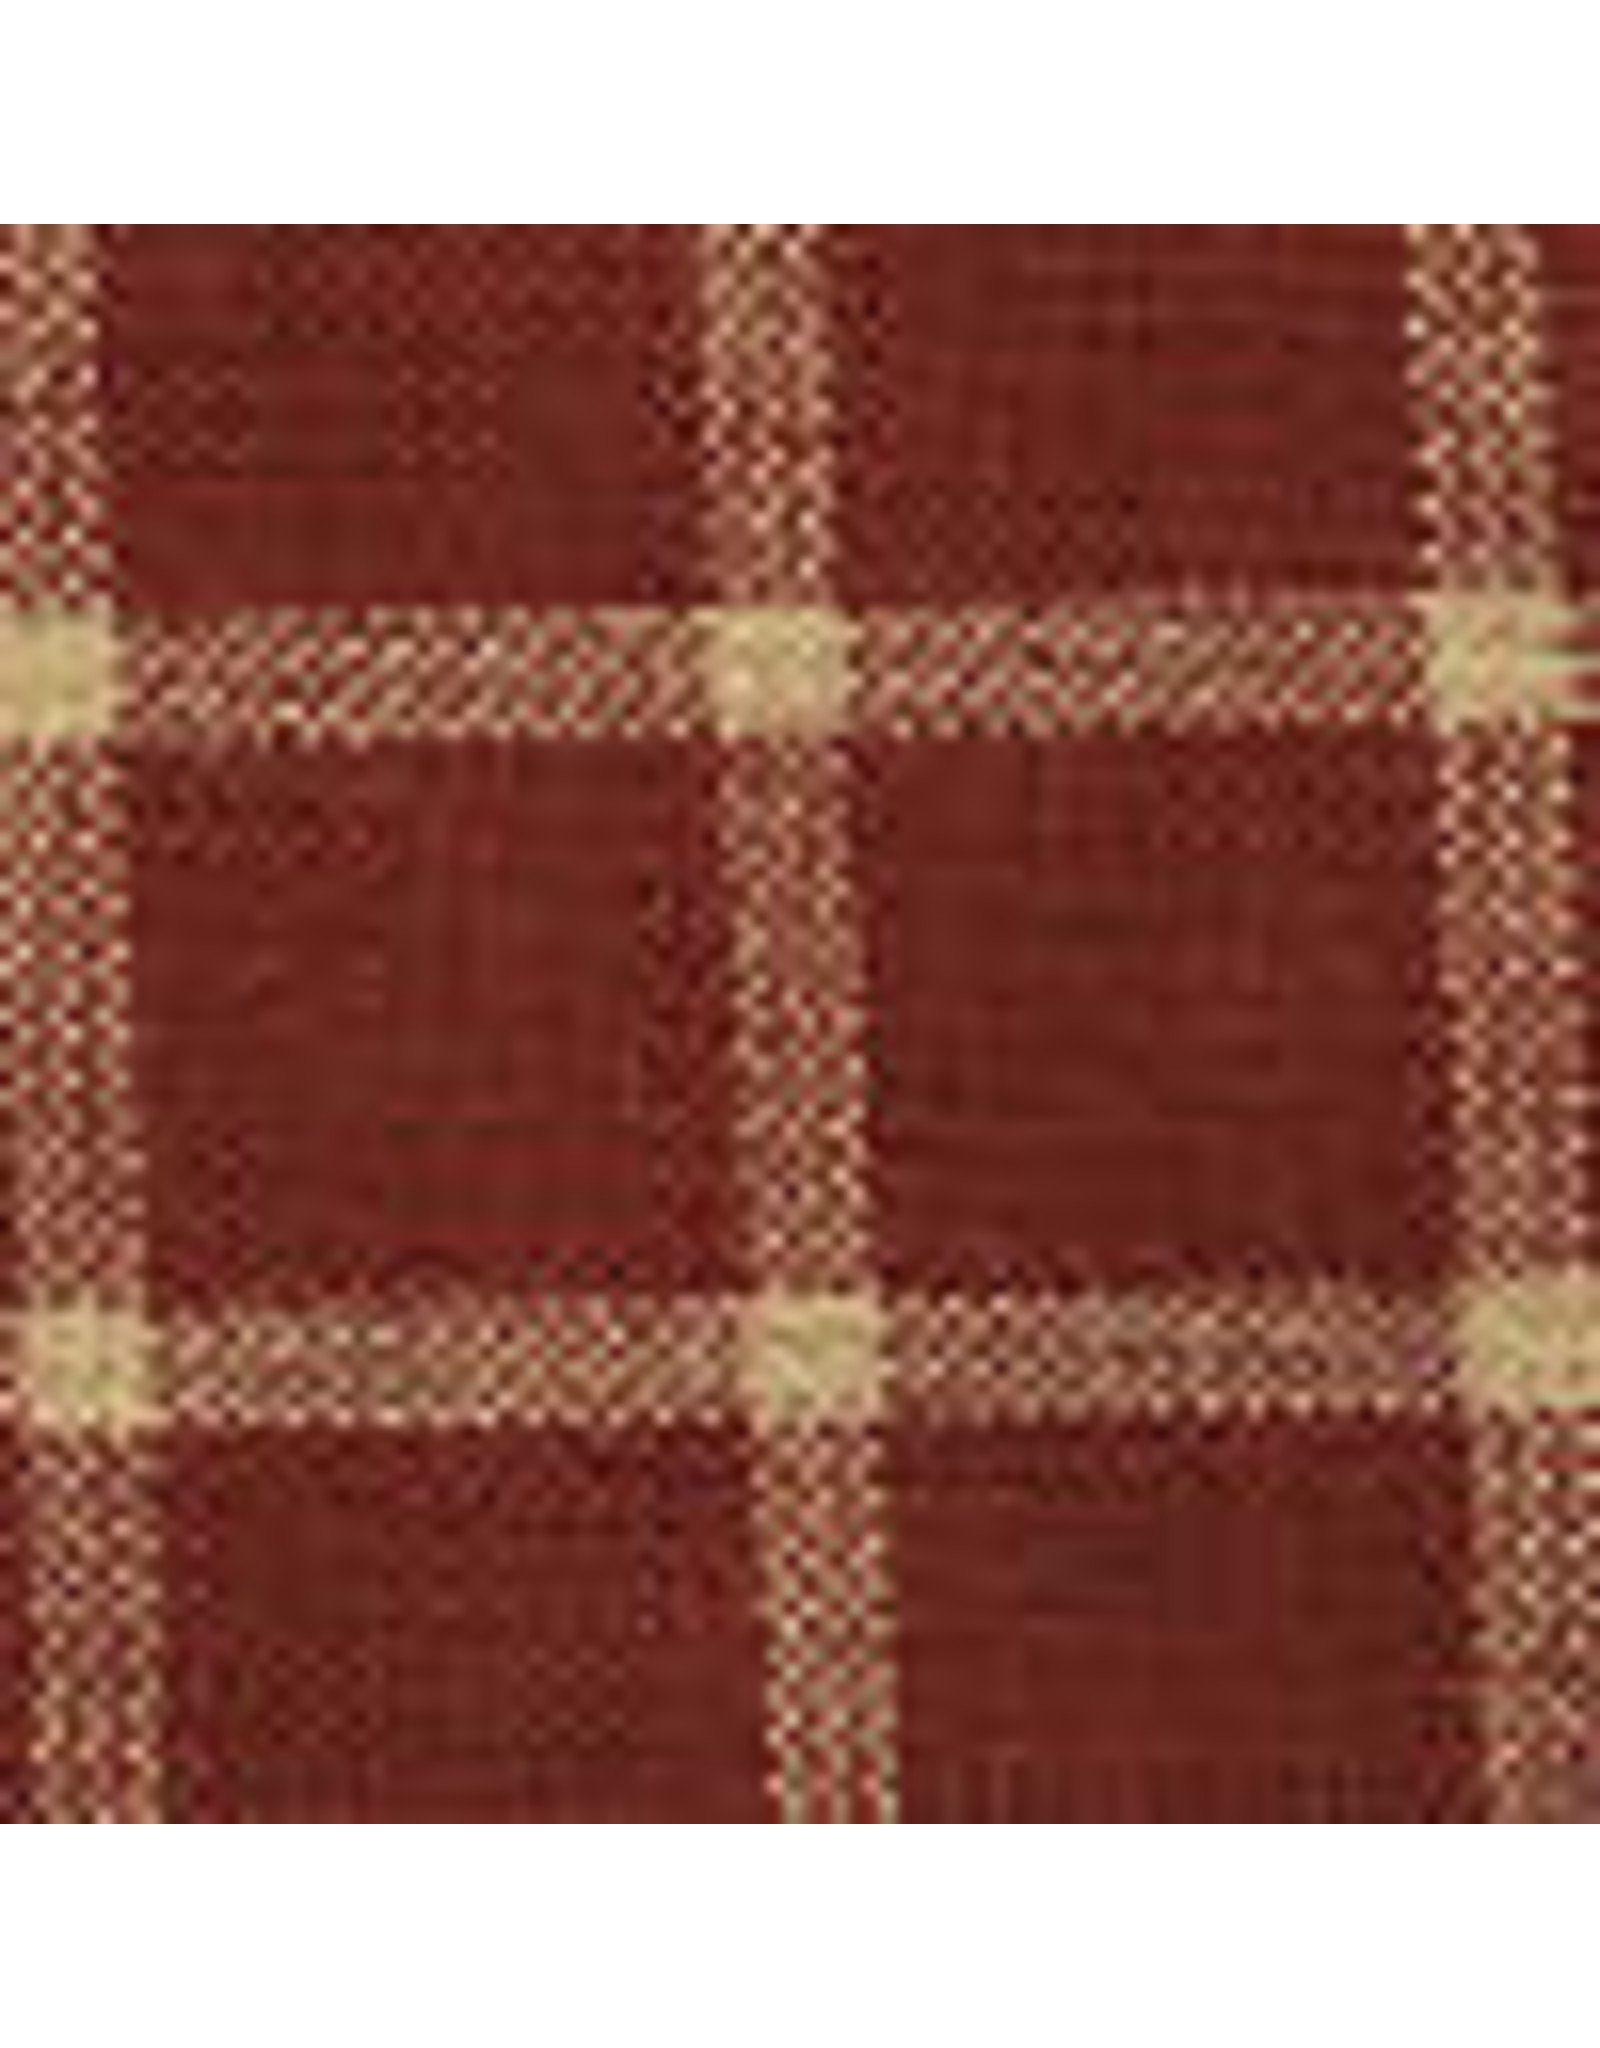 Yd. Red and Tan Reverse Window Pane Fabric #301